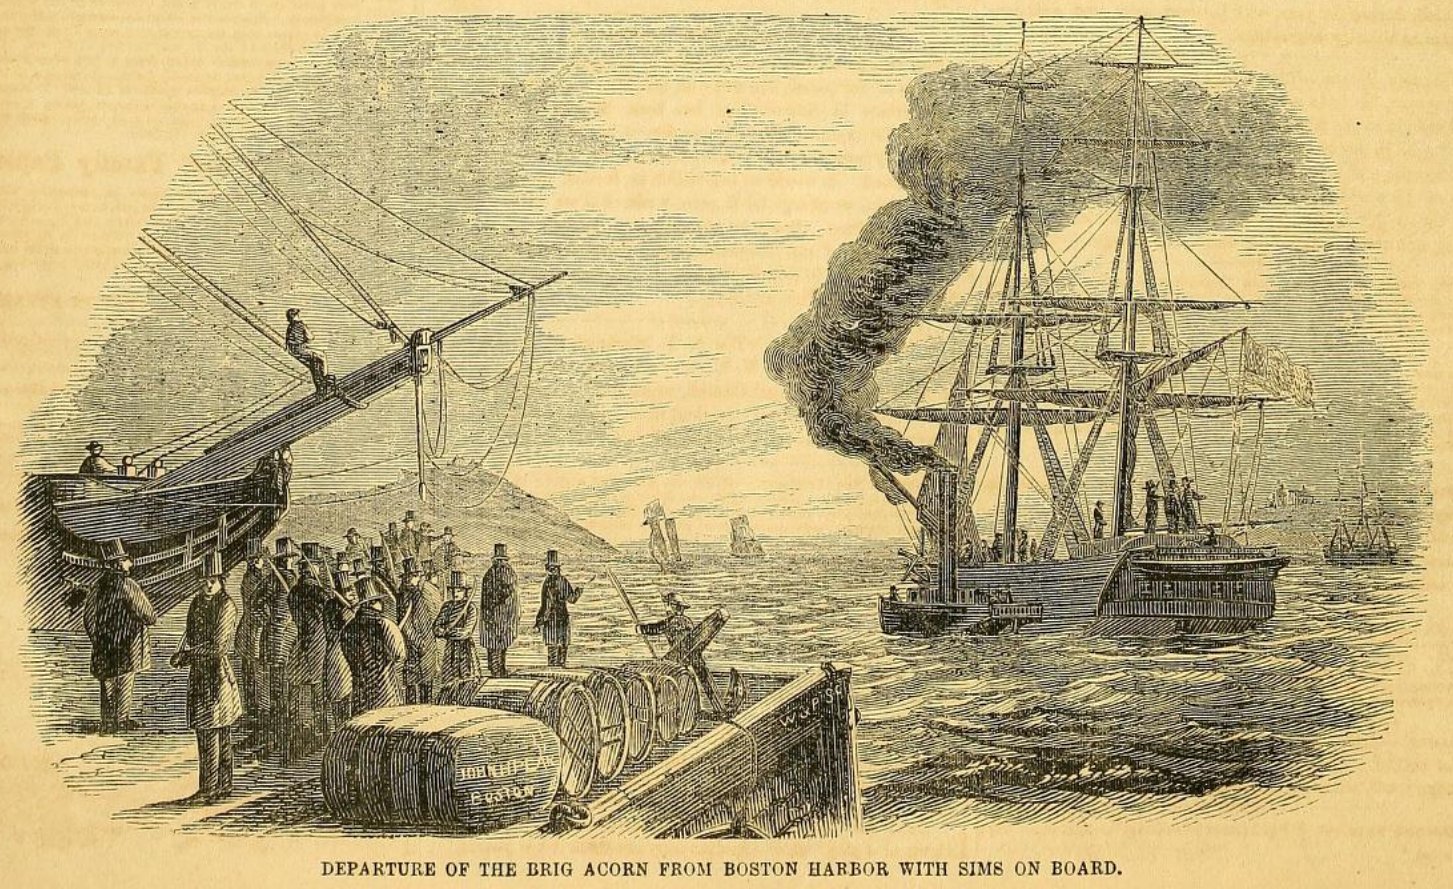 Sketch of a dock and a boat leaving the dock in Boston Harbor.